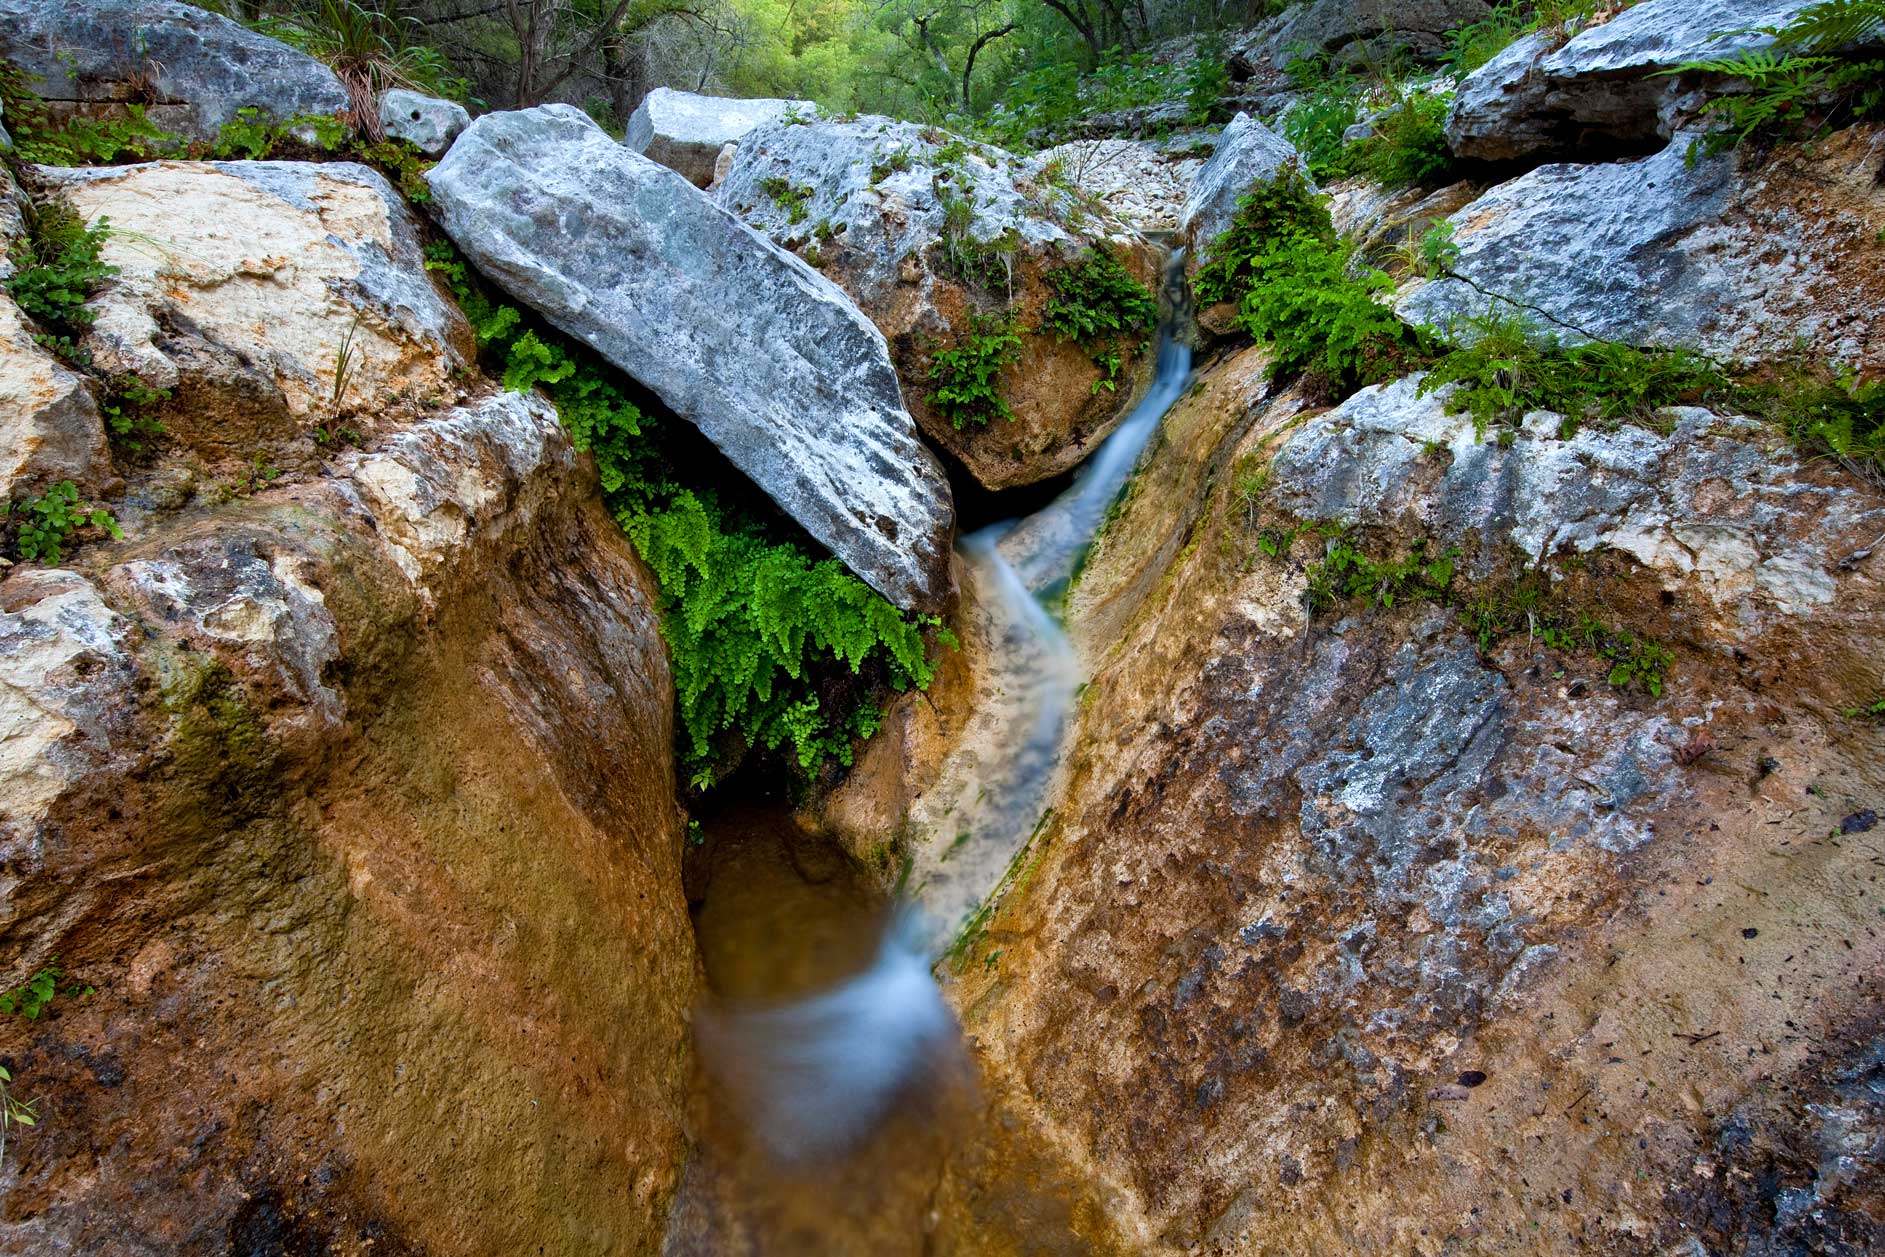 A small waterfall flows over rocks